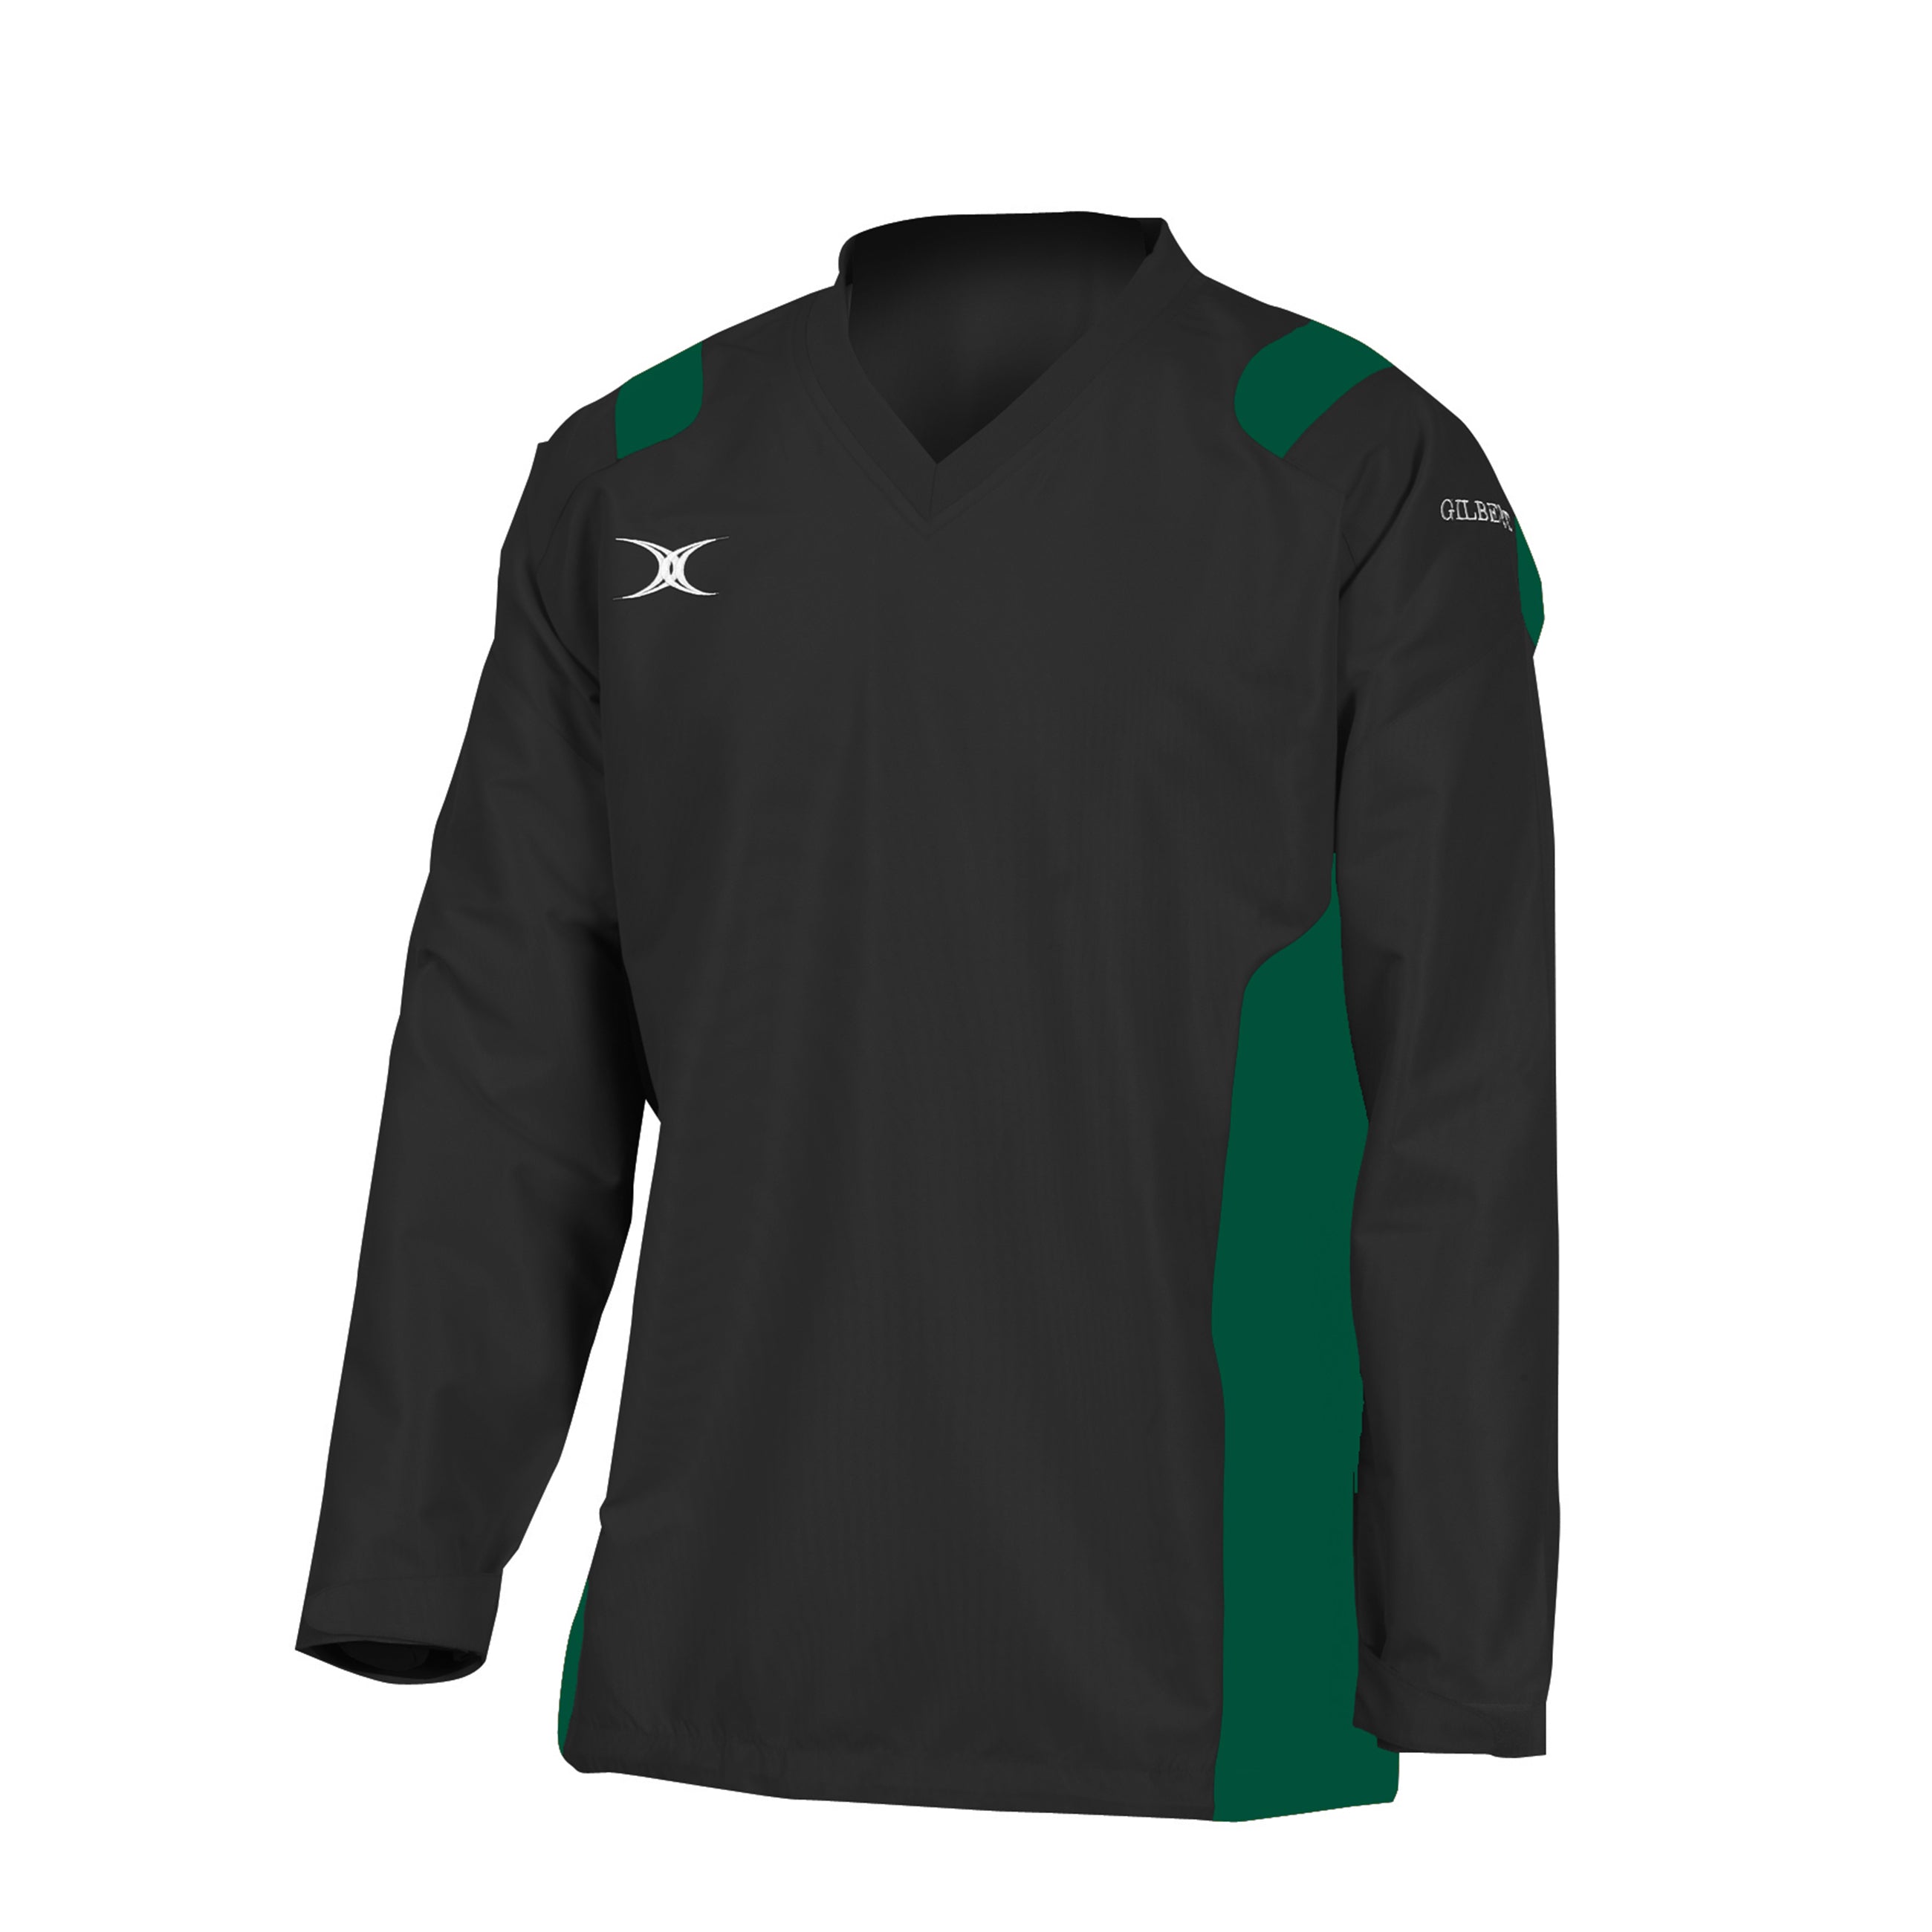 Gilbert Rugby Clothing | Clothing made for Rugby